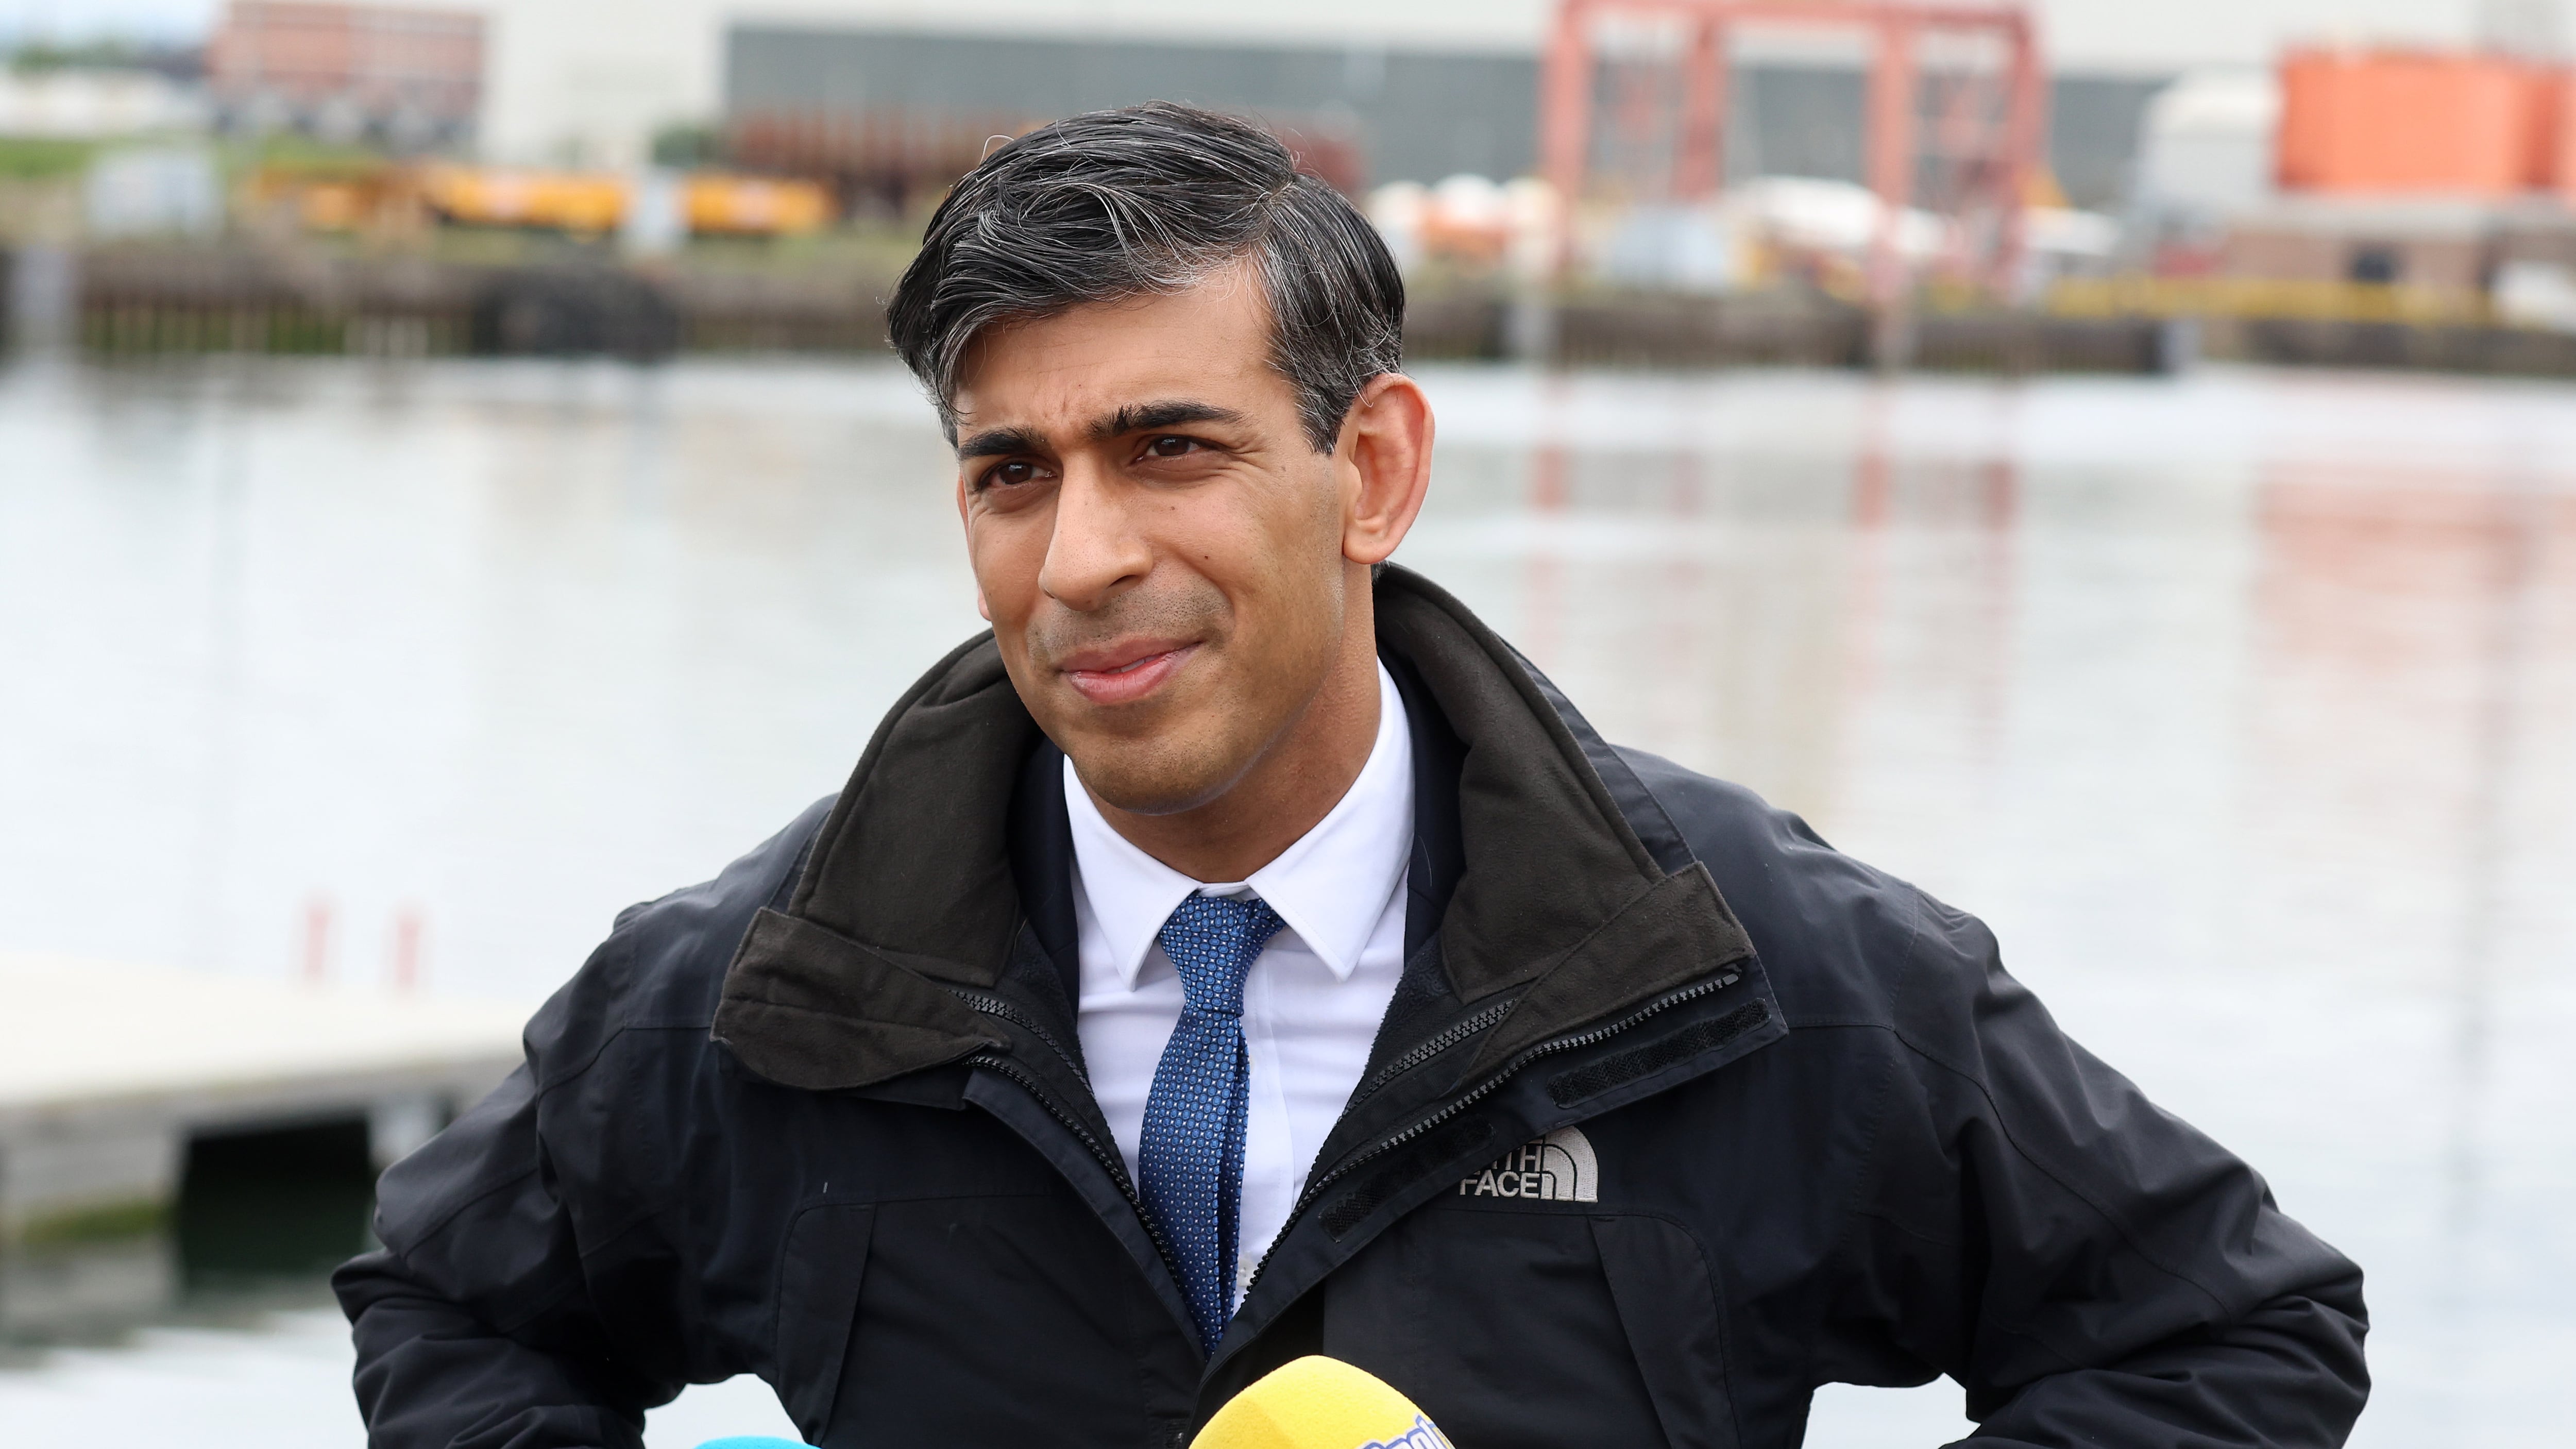 British Prime Minister Rishi Sunak with his hands in his pockets in Belfast with outgoing NI Secretary of State Chris Heaton-Harris on the latest leg of his election campaign tour in Belfast. PICTURE: MAL MCCANN